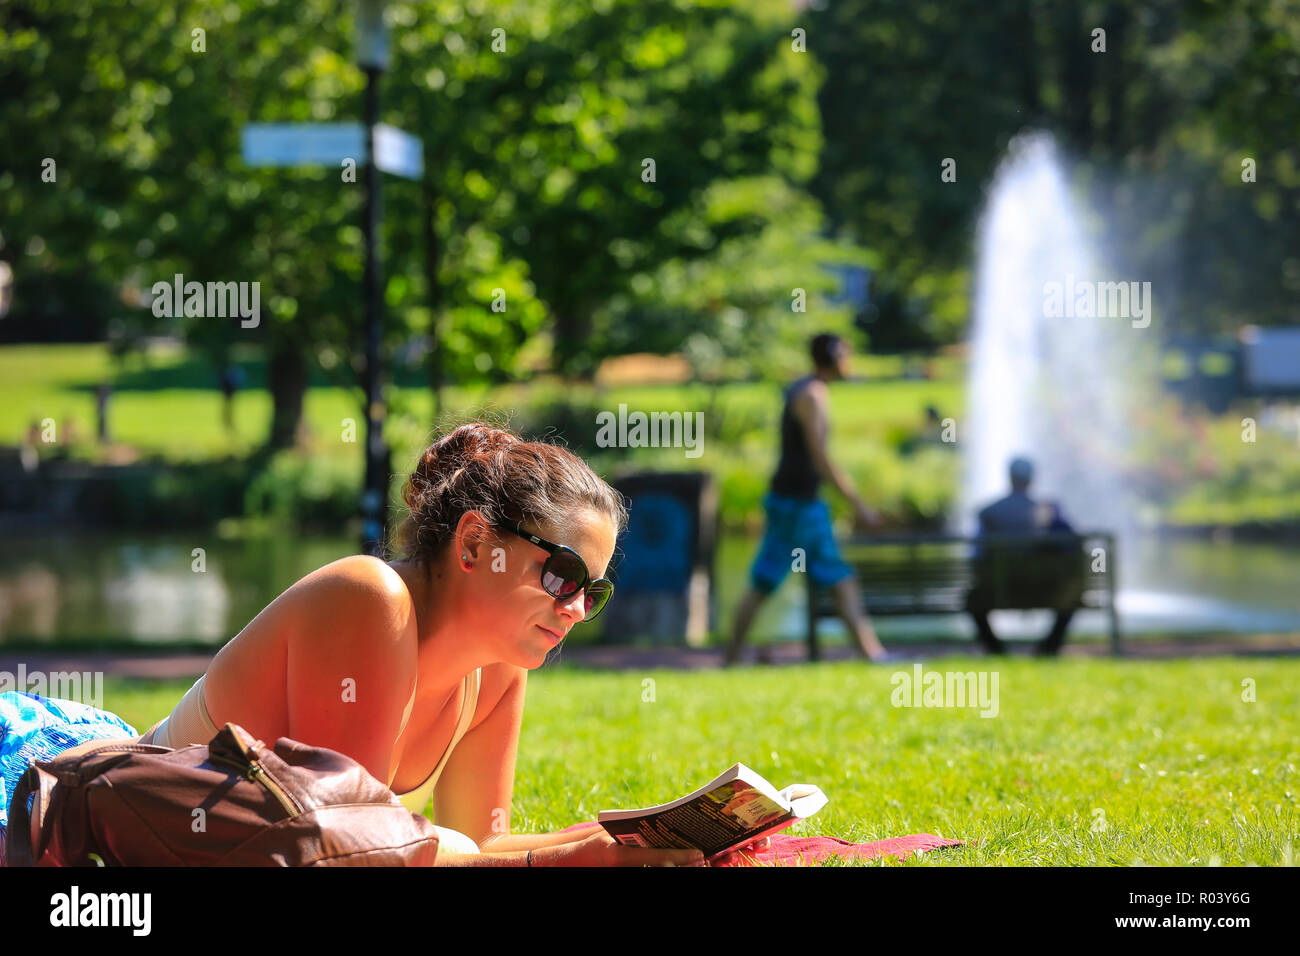 Essen, Germany, Ruhr area, city garden, young woman lies on the meadow and reads in a book Stock Photo